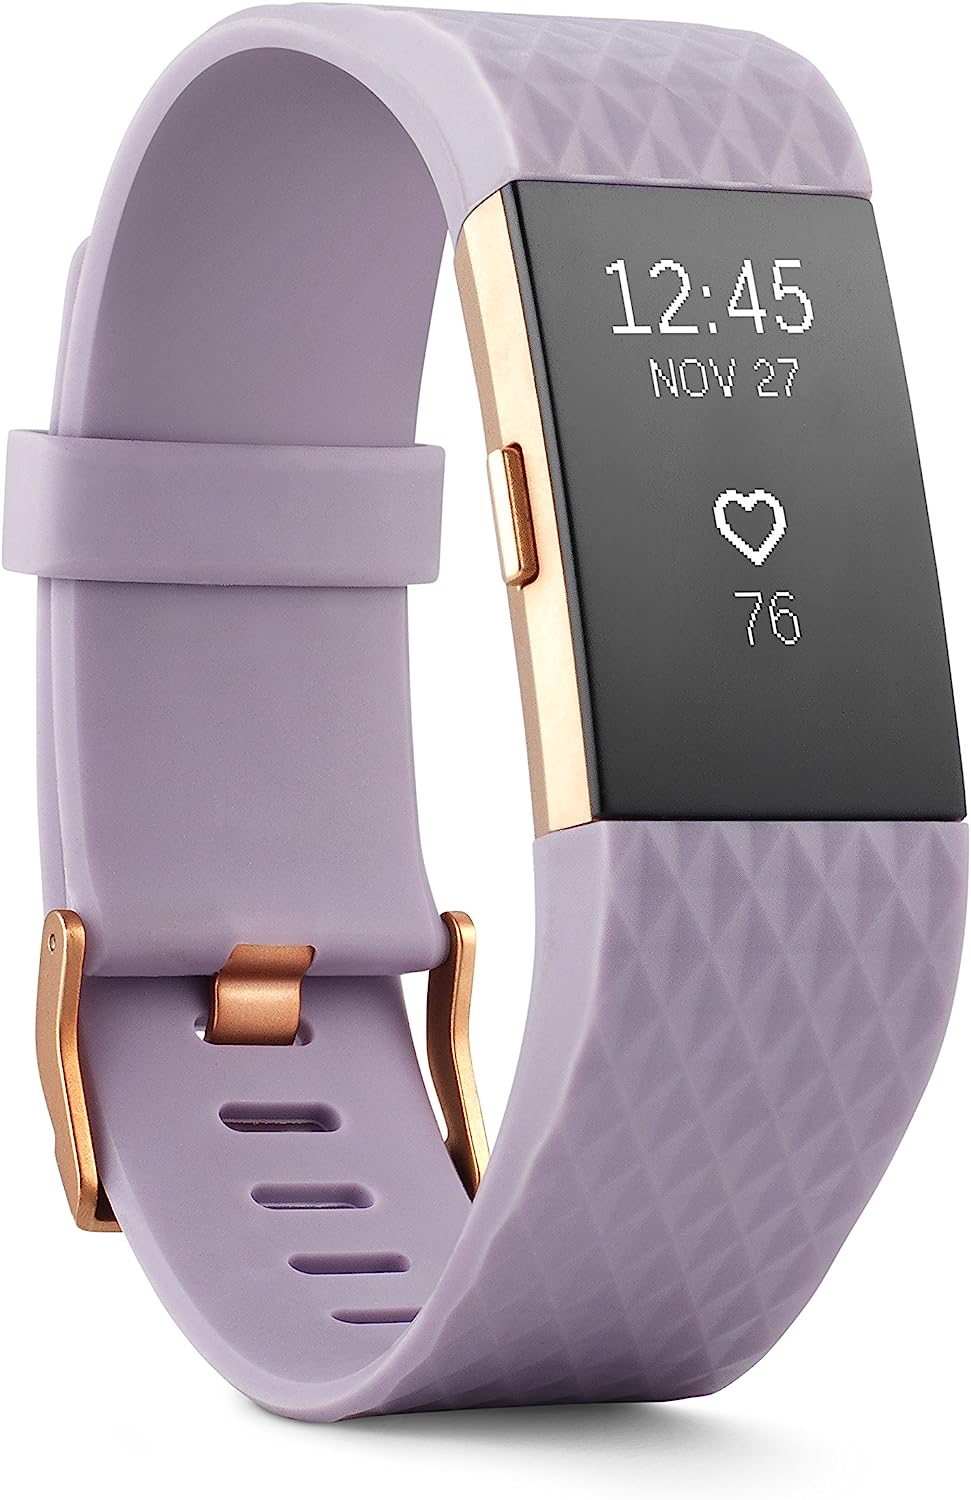 Fitbit Charge 2 Activity Tracker - Lavender Special Edition - Excellent